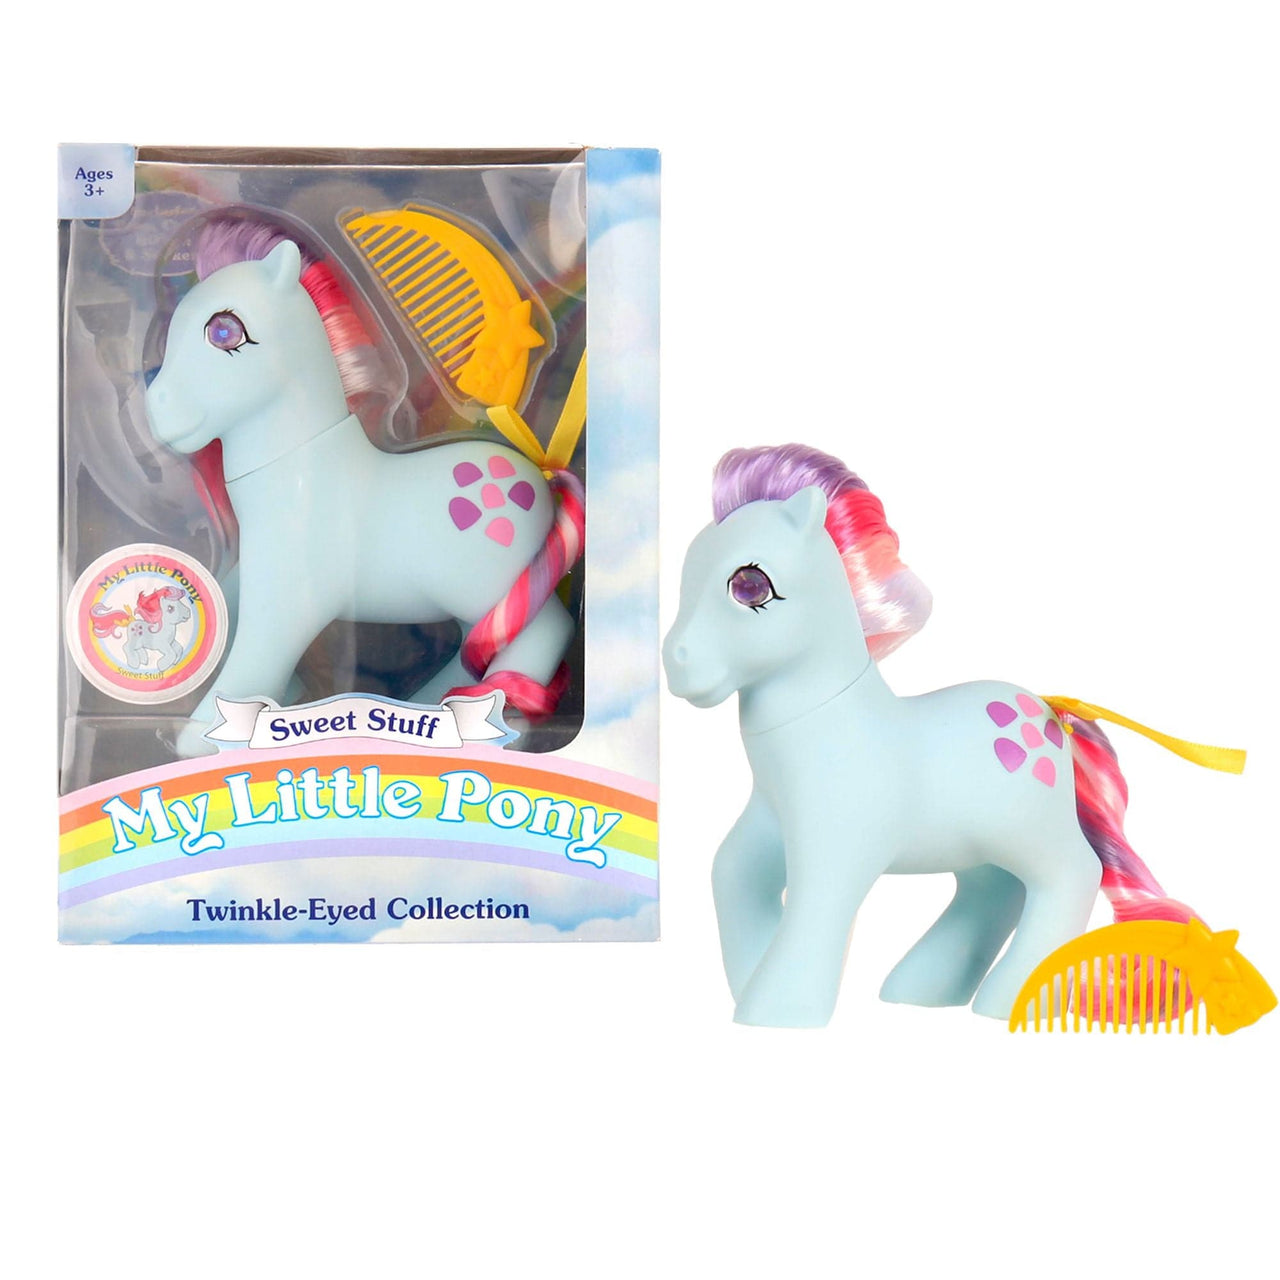 My Little Pony My Little Pony 35th Anniversary My Little Pony Twinkle Eyed Collection Sweet Stuff (7561346547960)